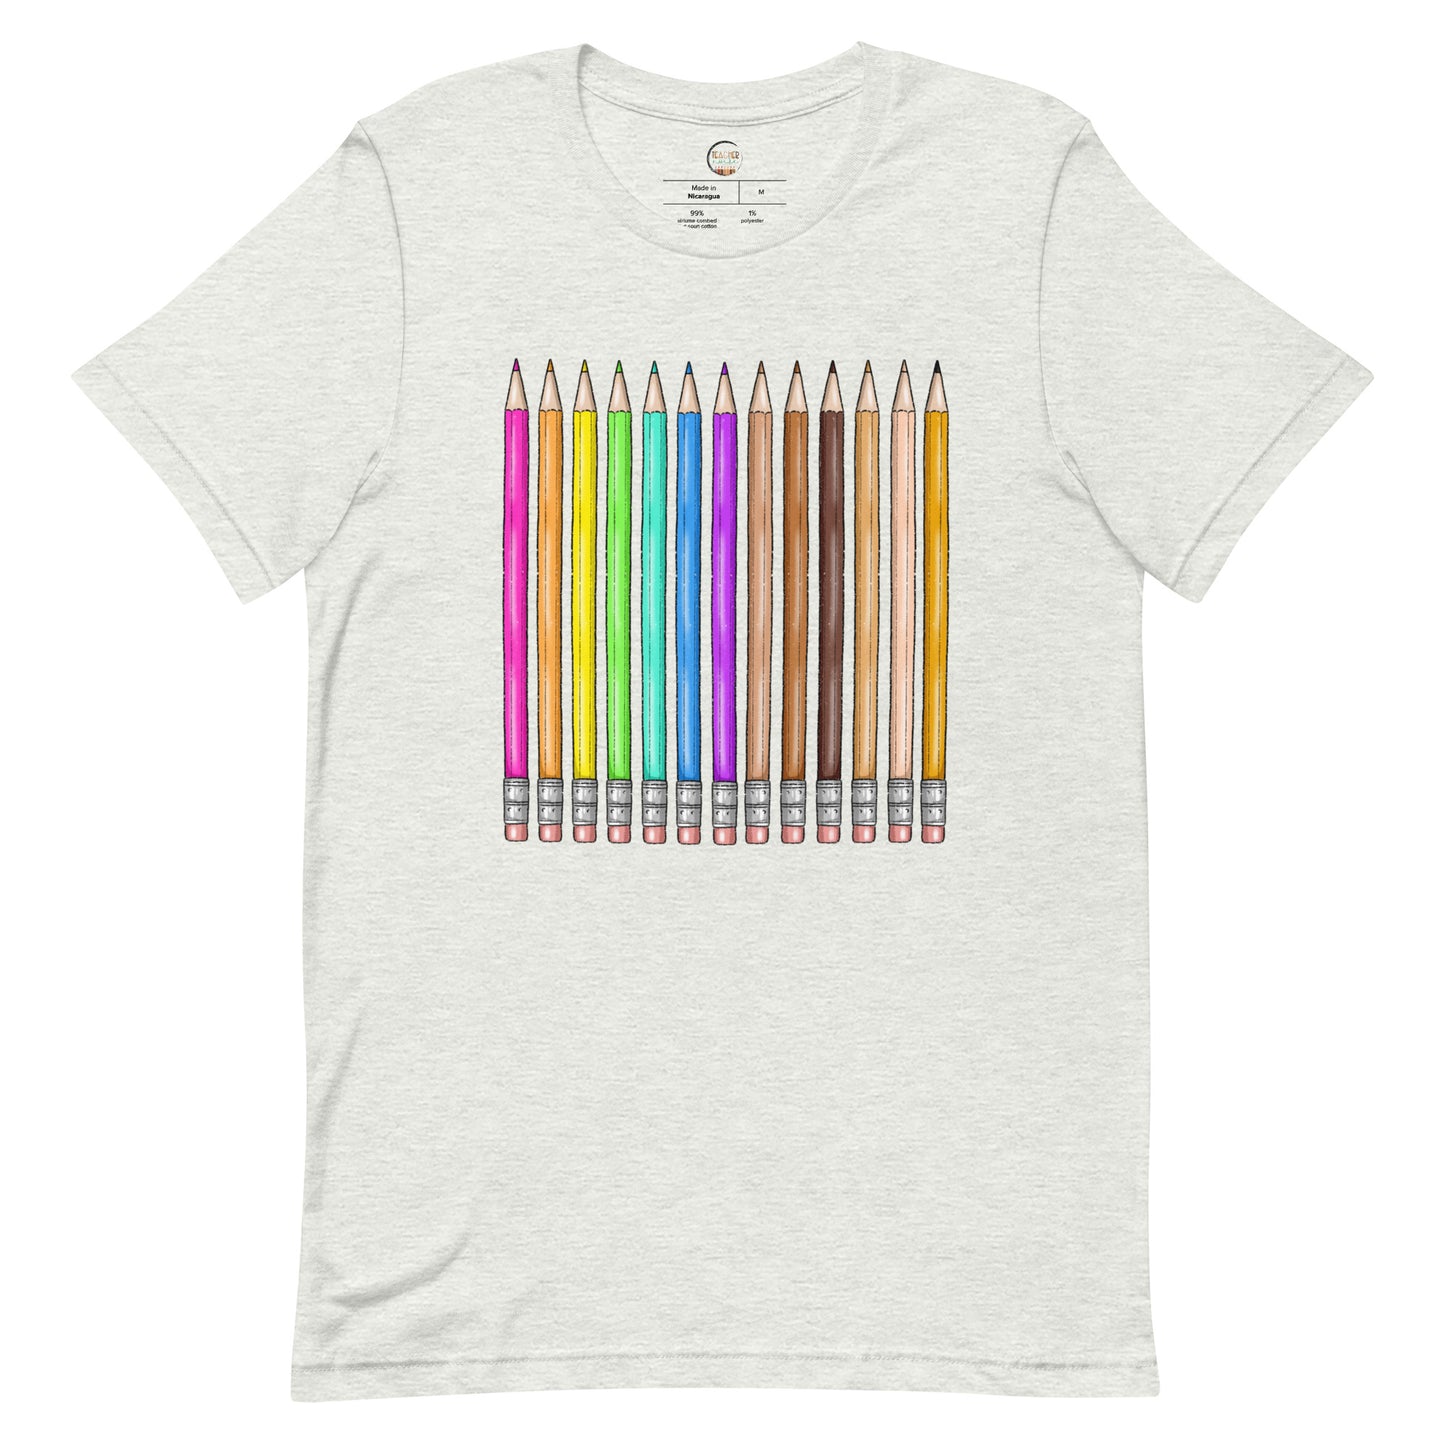 All Are Welcomed, Pride Teacher T-shirt, Colored Pencils Rainbow Shirt